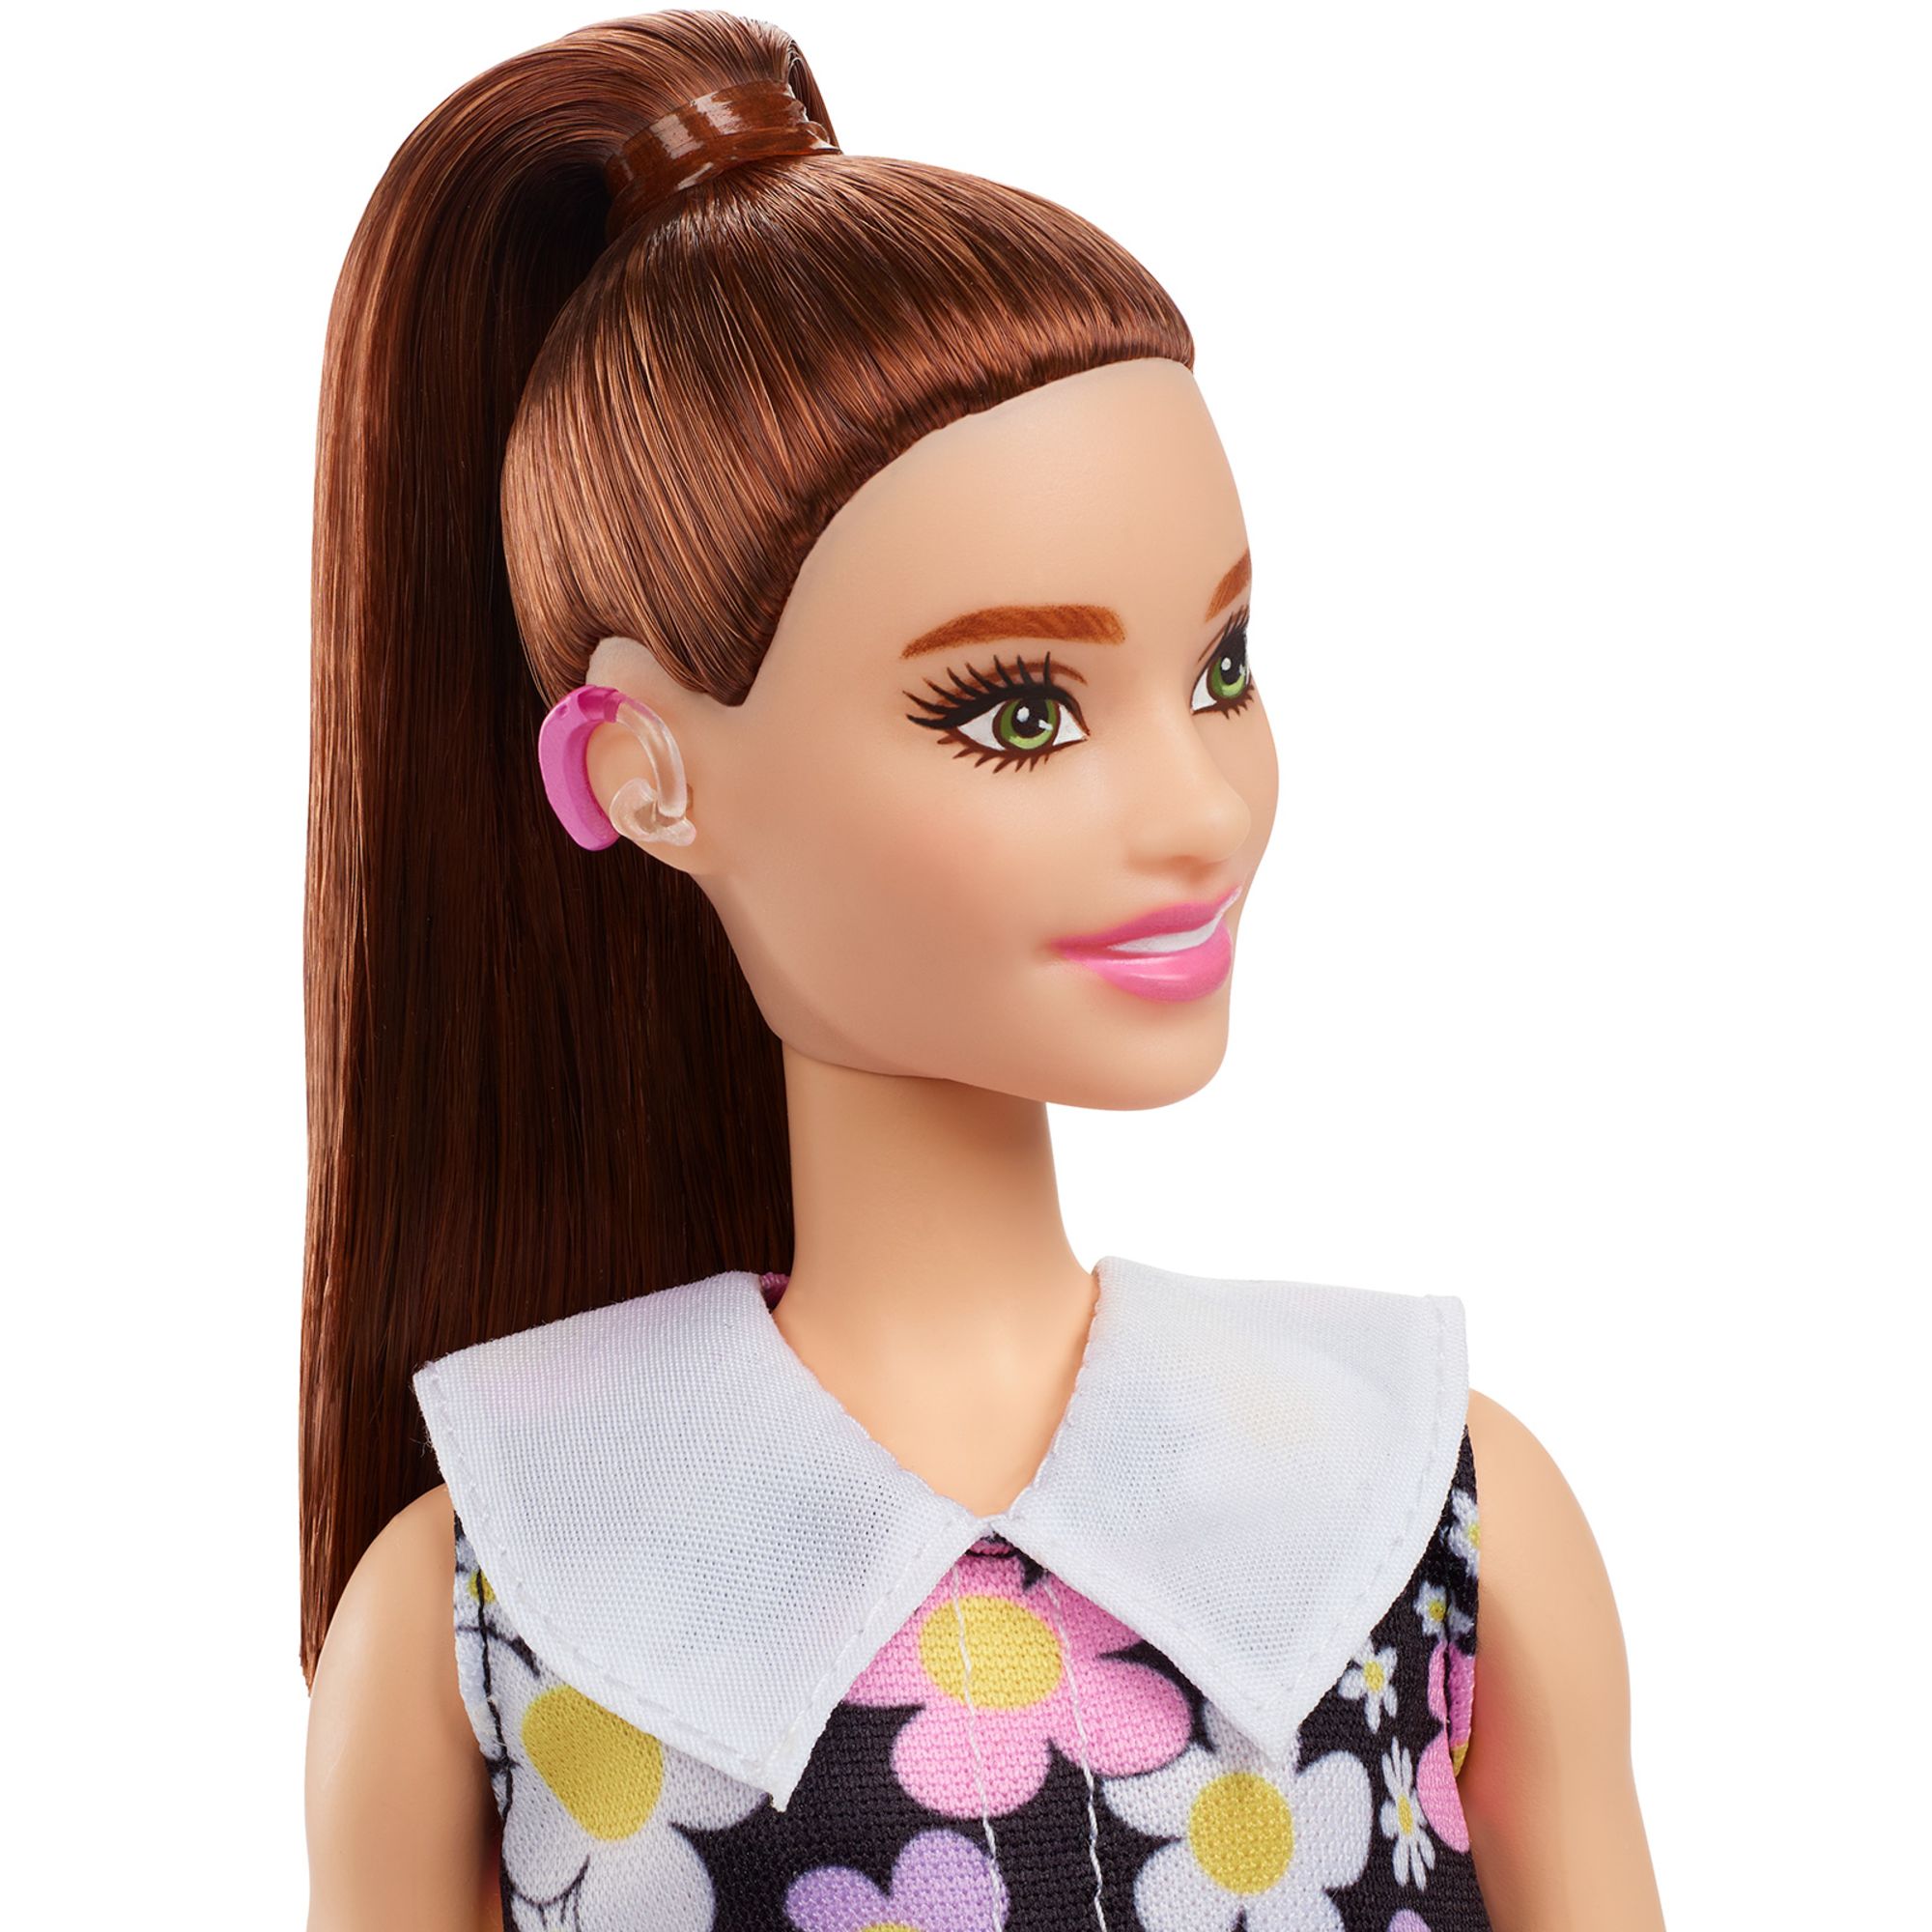 New Barbie collection celebrates the importance of wellness and